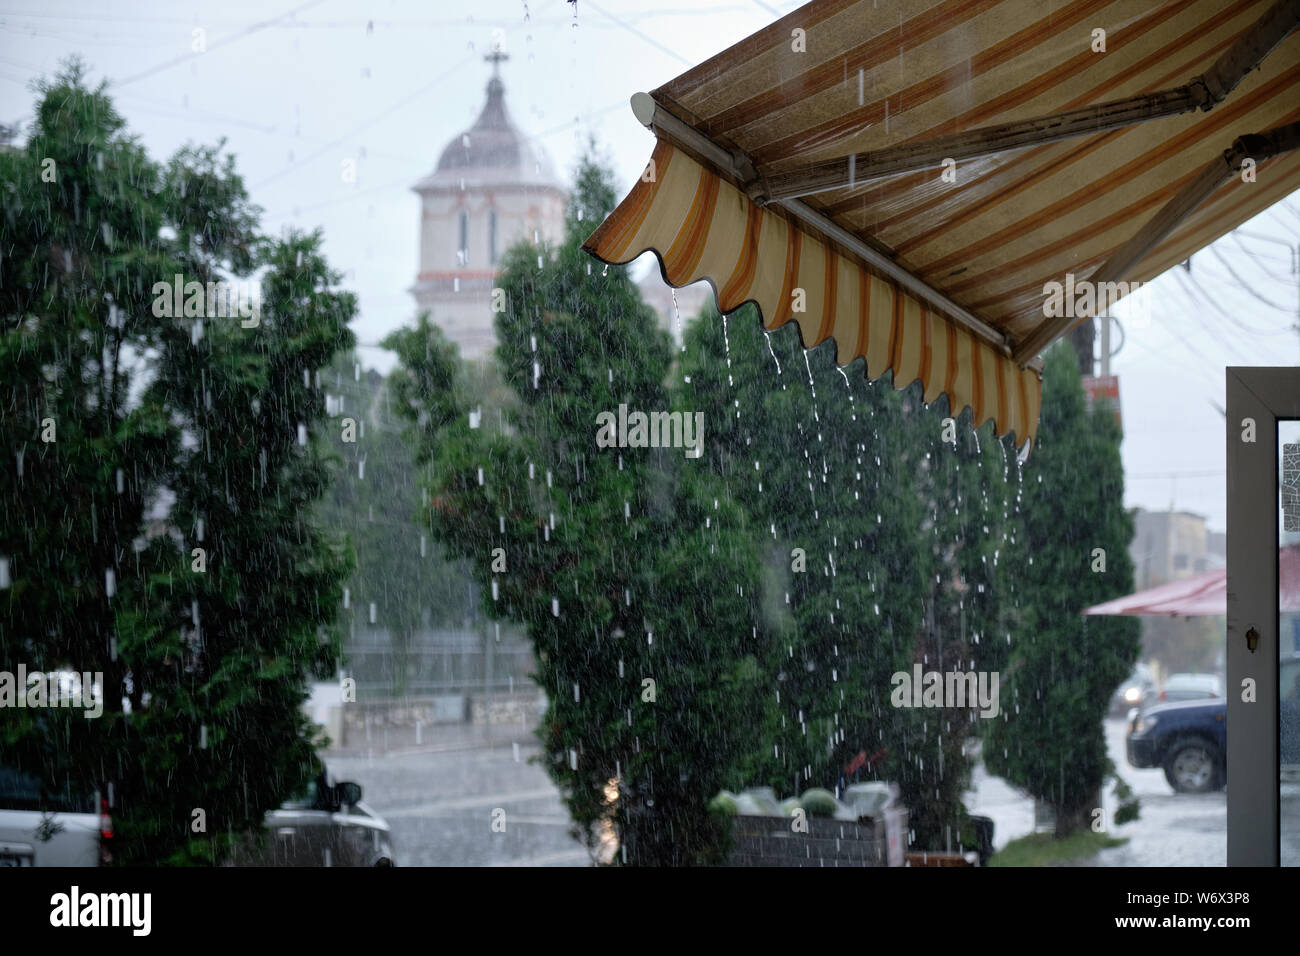 Store front awning dripping during heavy rain storm.  Street view with church in background Stock Photo